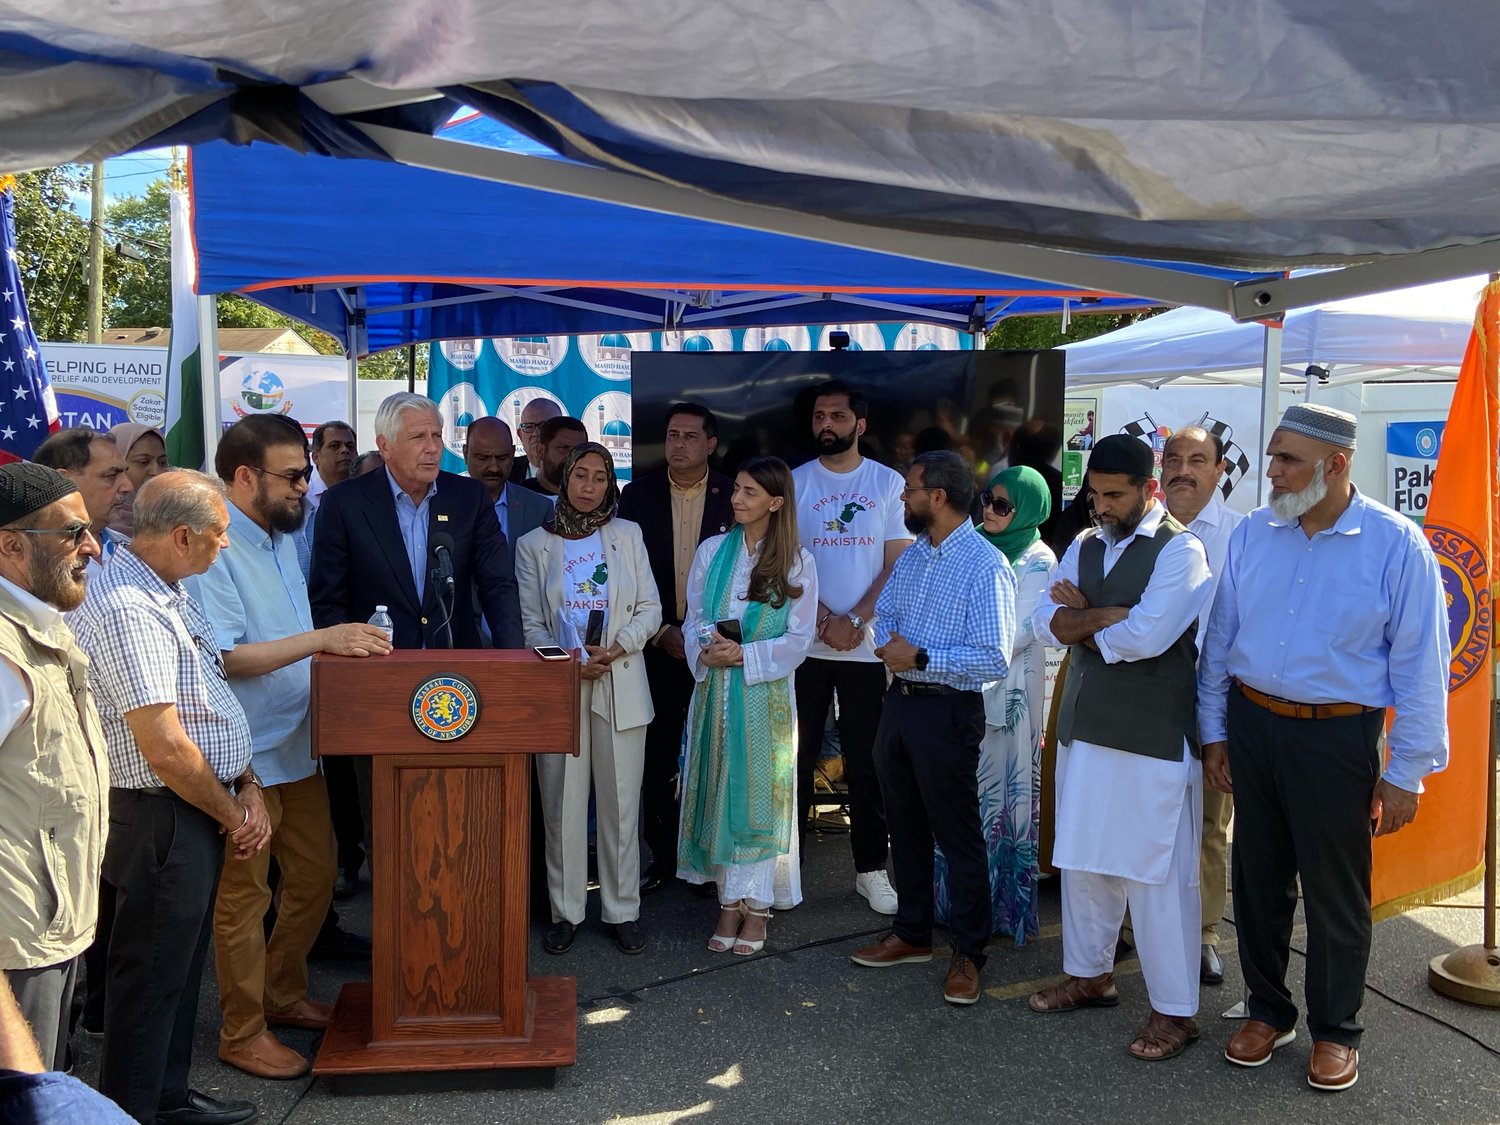 Nassau County Executive Bruce Blakeman was joined by numerous local Pakistani leaders and residents to announce his relief effort for Pakistan in Valley Stream last Friday.